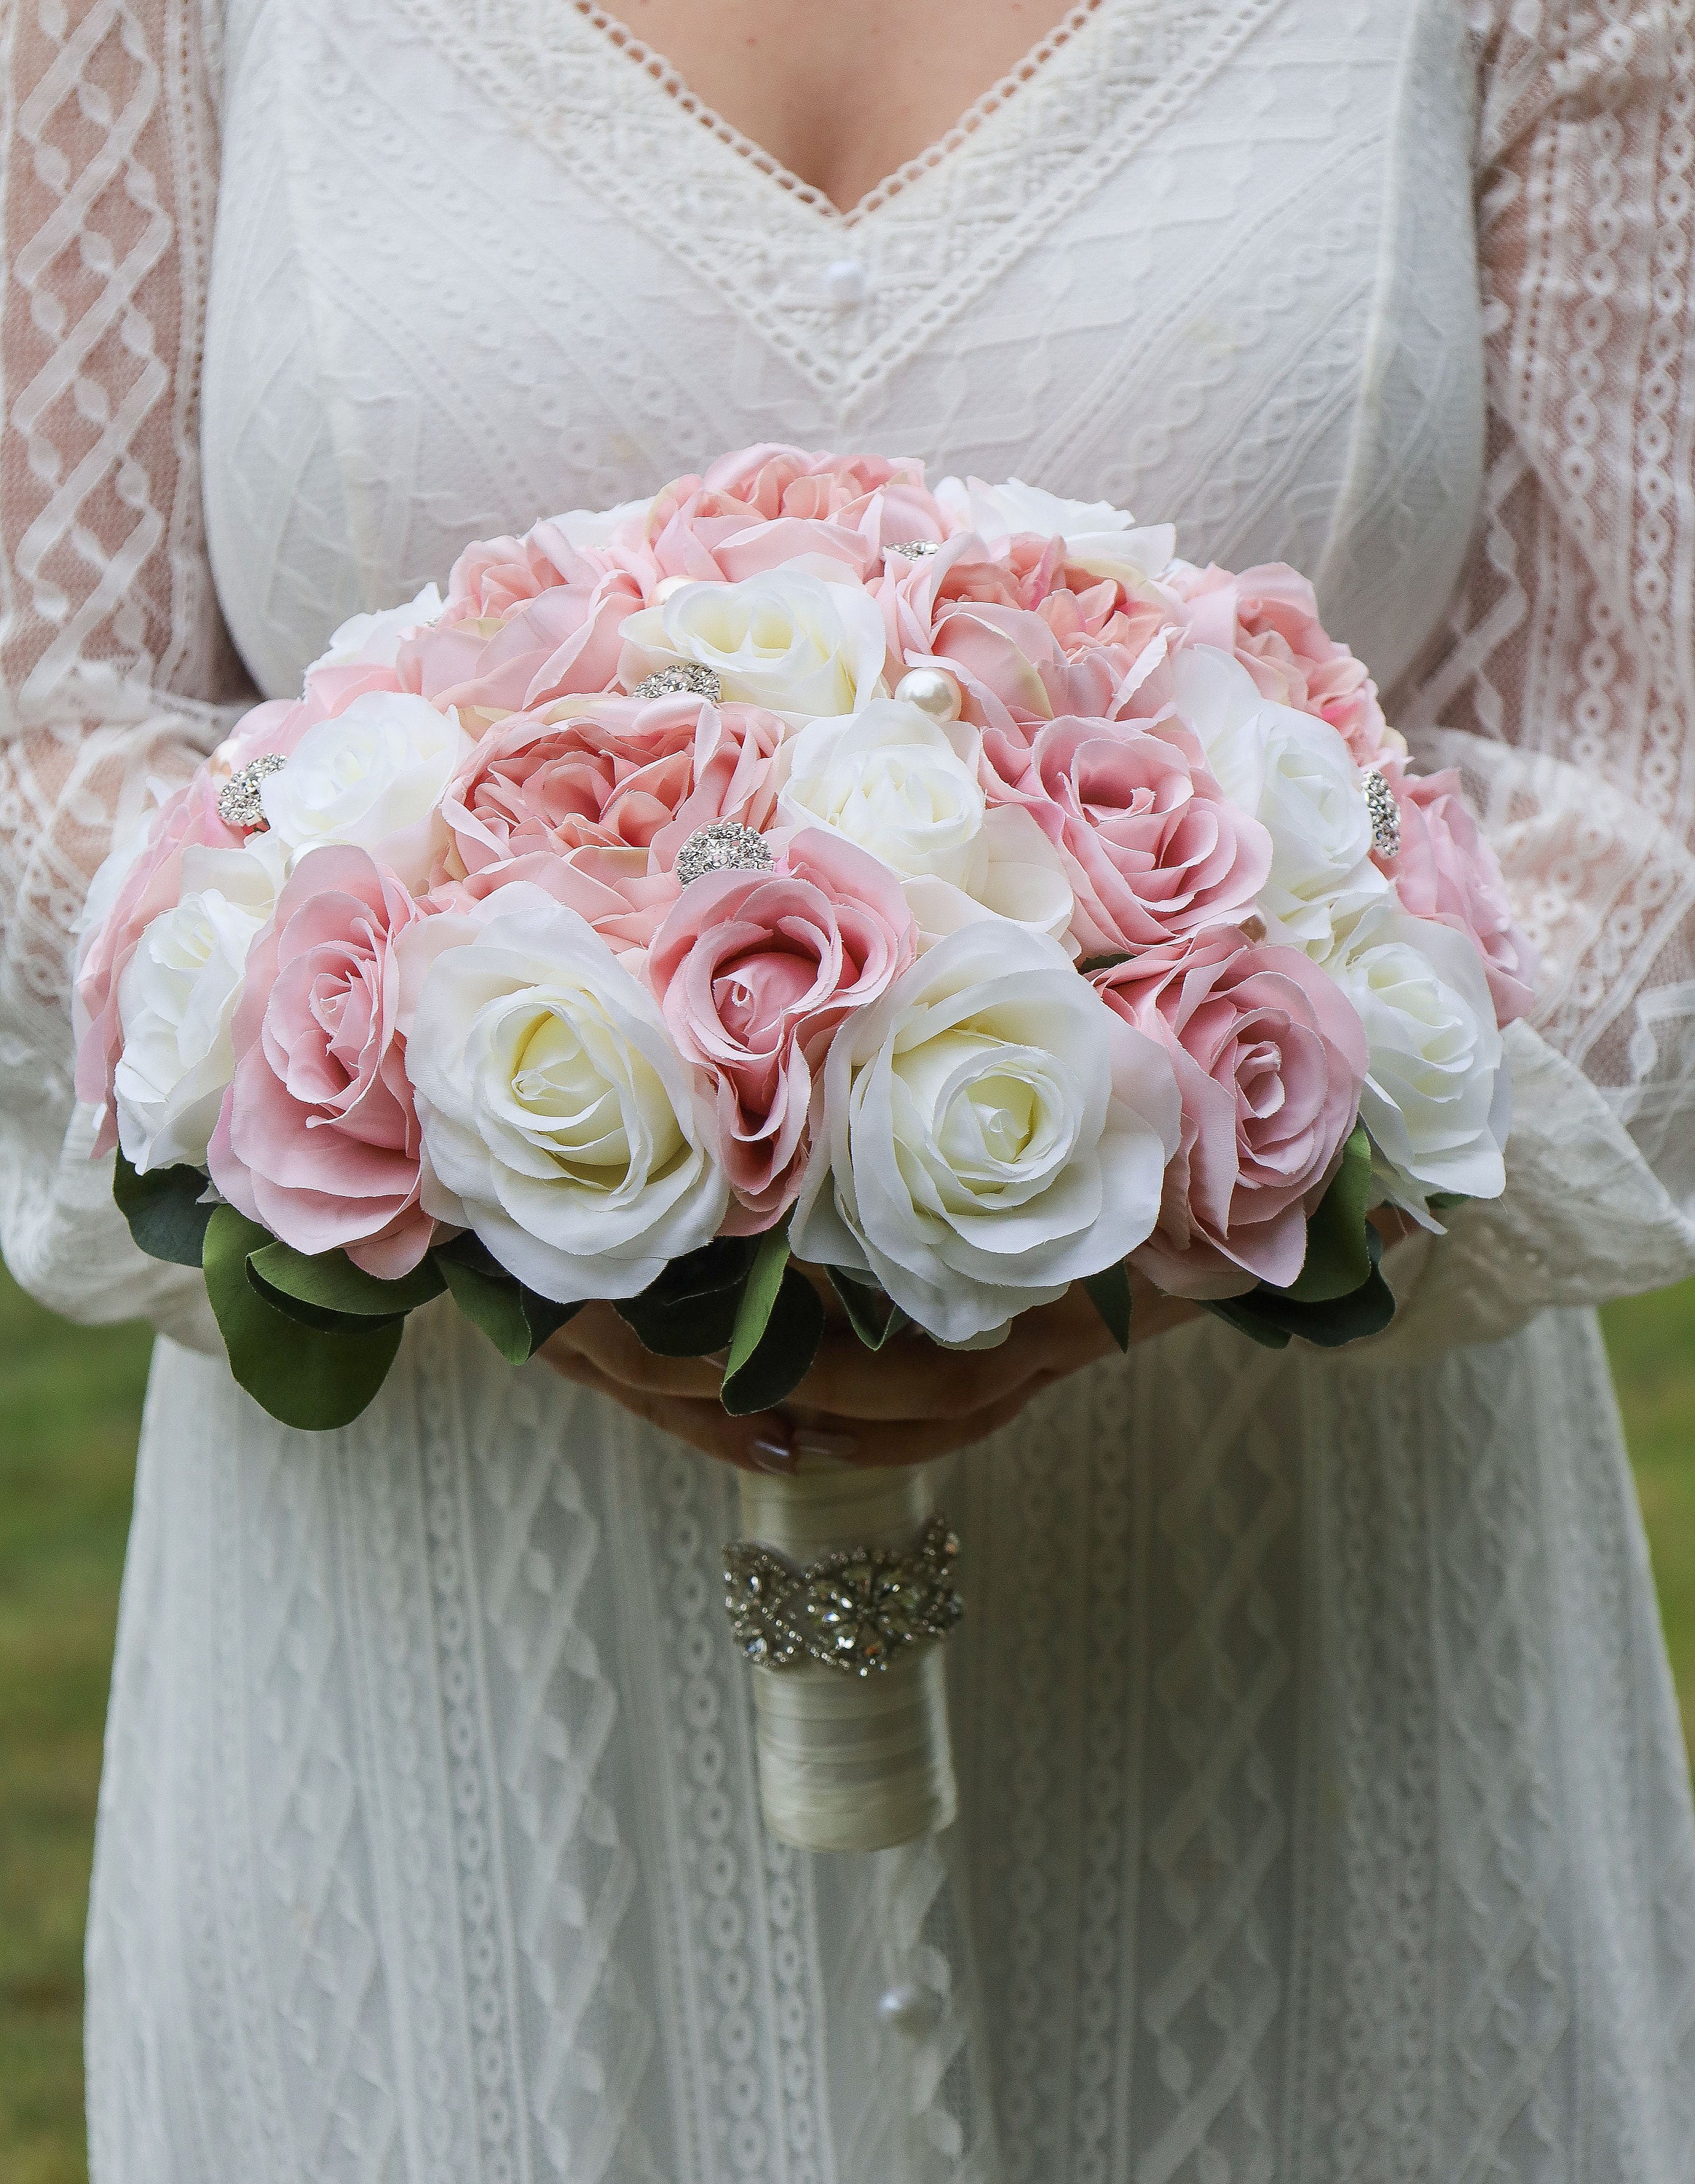 Pink Wedding Bouquet w/ Pale Pink Blush Roses - Dried Flowers Forever